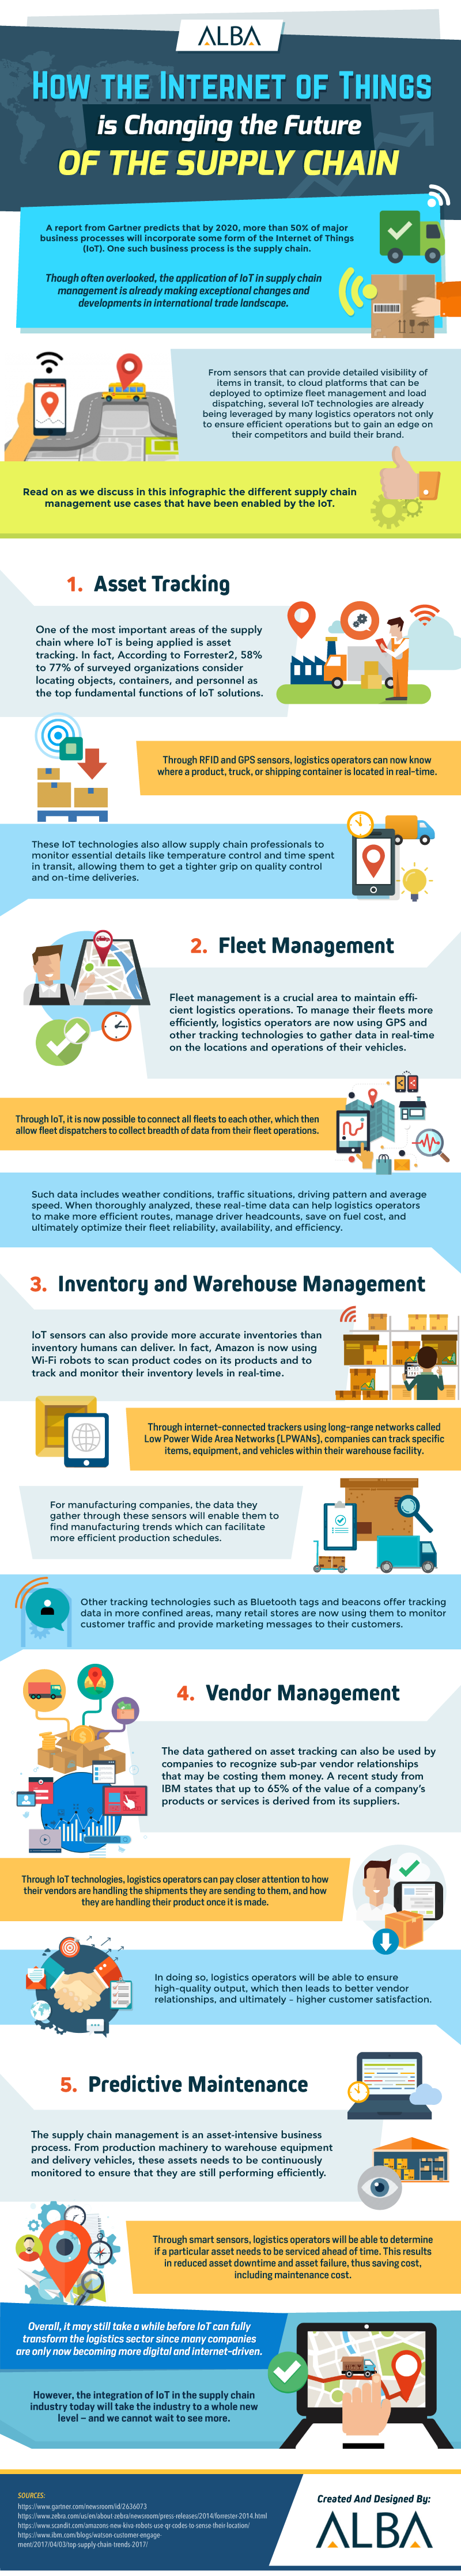 How the Internet of Things is Changing the Future of the Supply Chain - Infographic